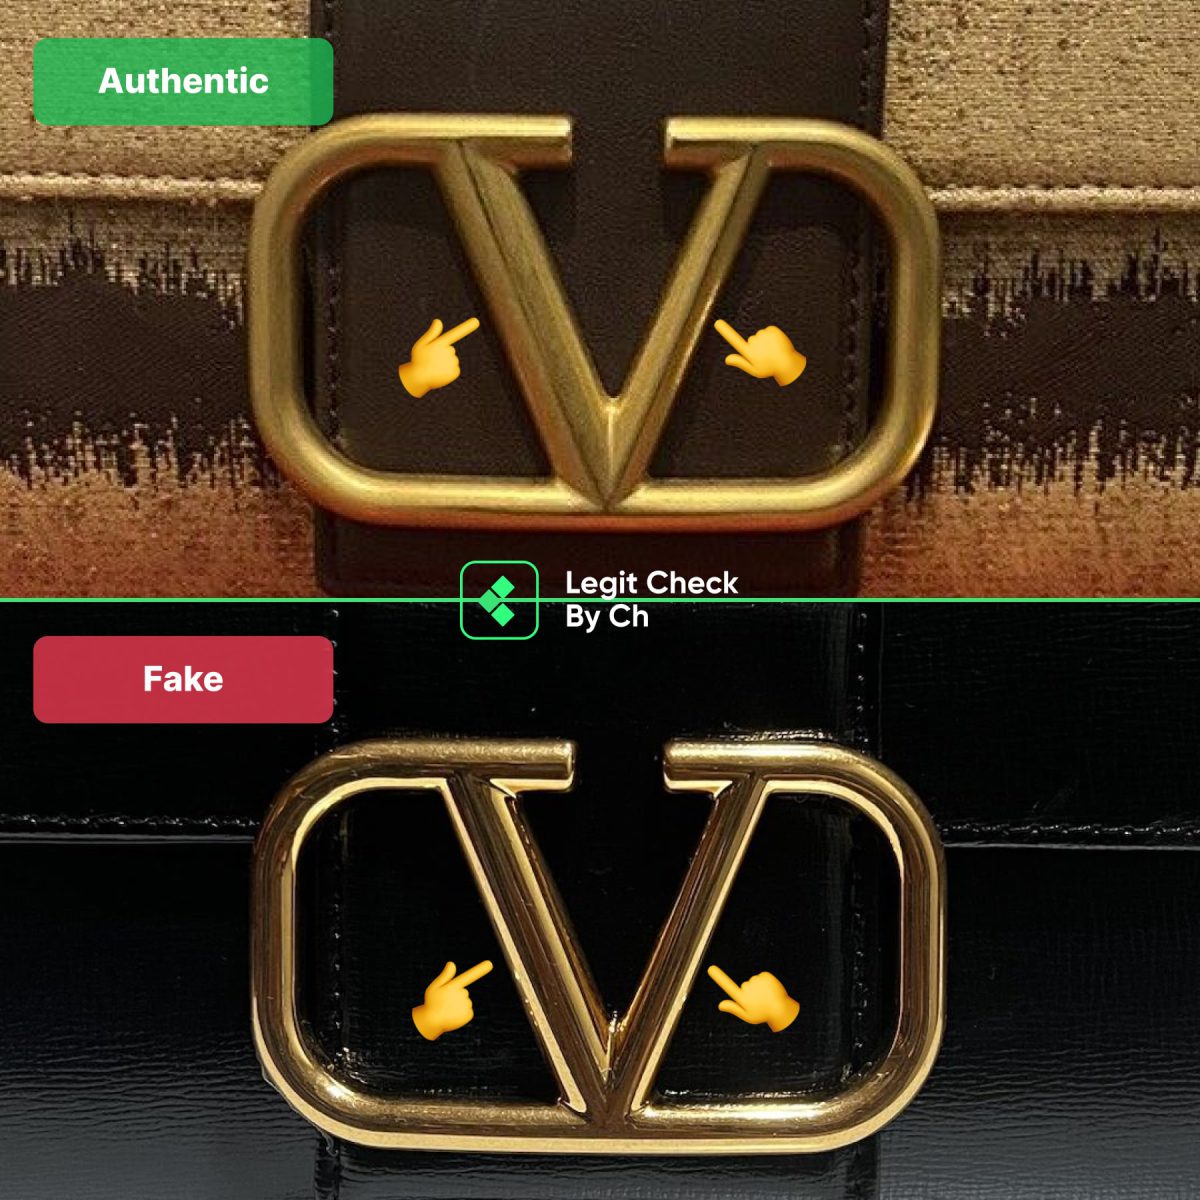 Comparing real vs fake Valentino bags for their V logos